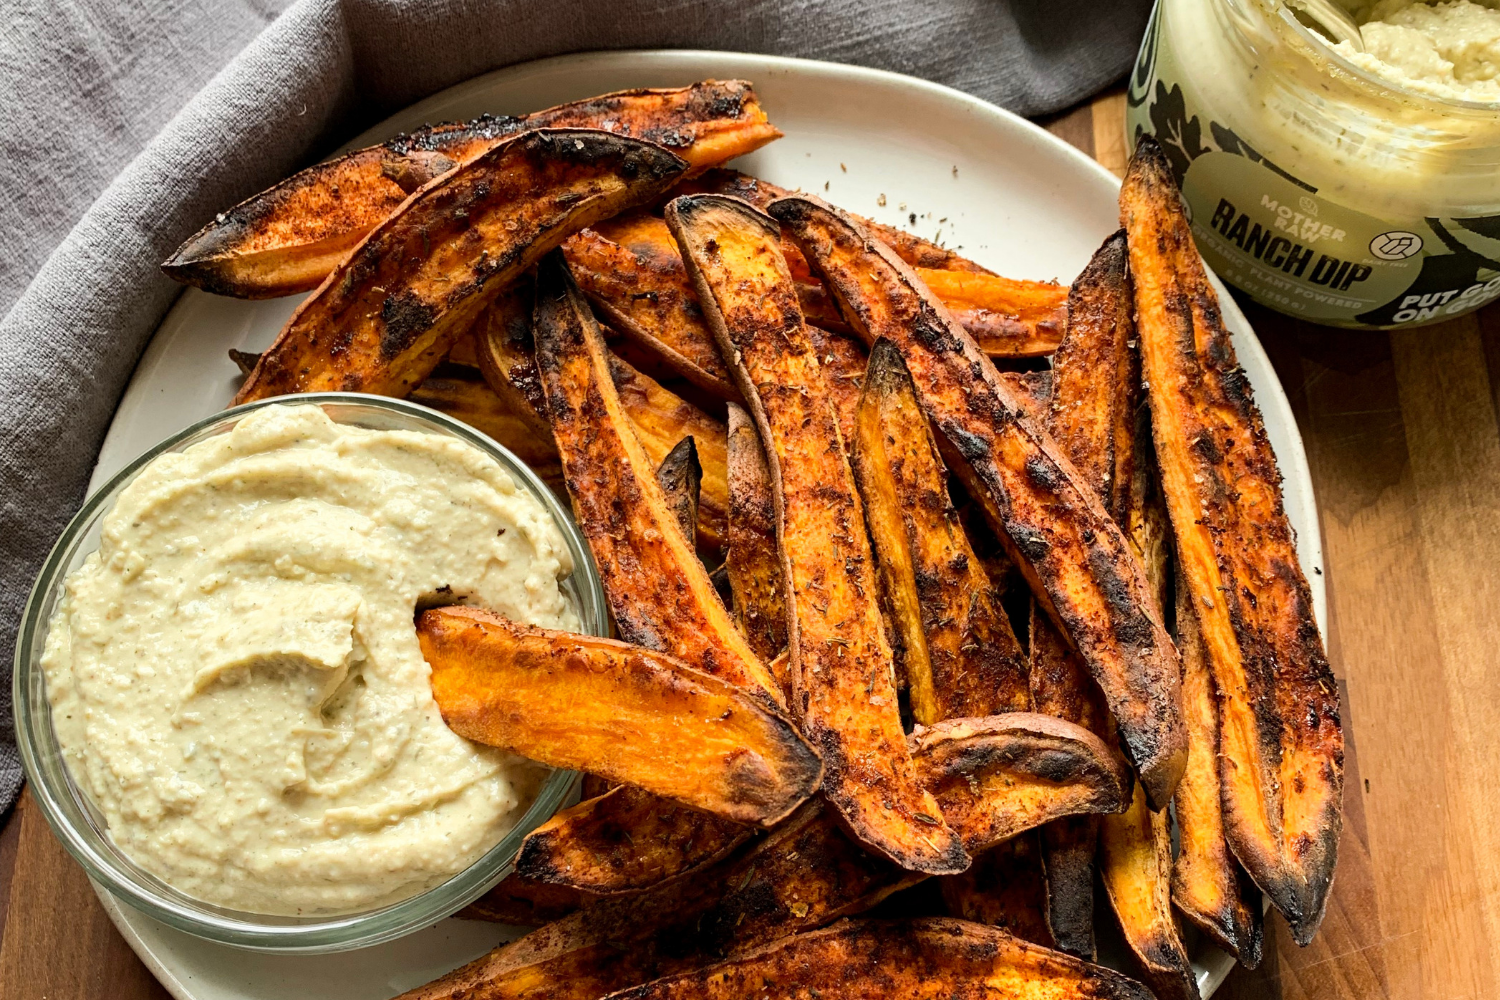 These paprika potato chips with ranch dip are better (and better